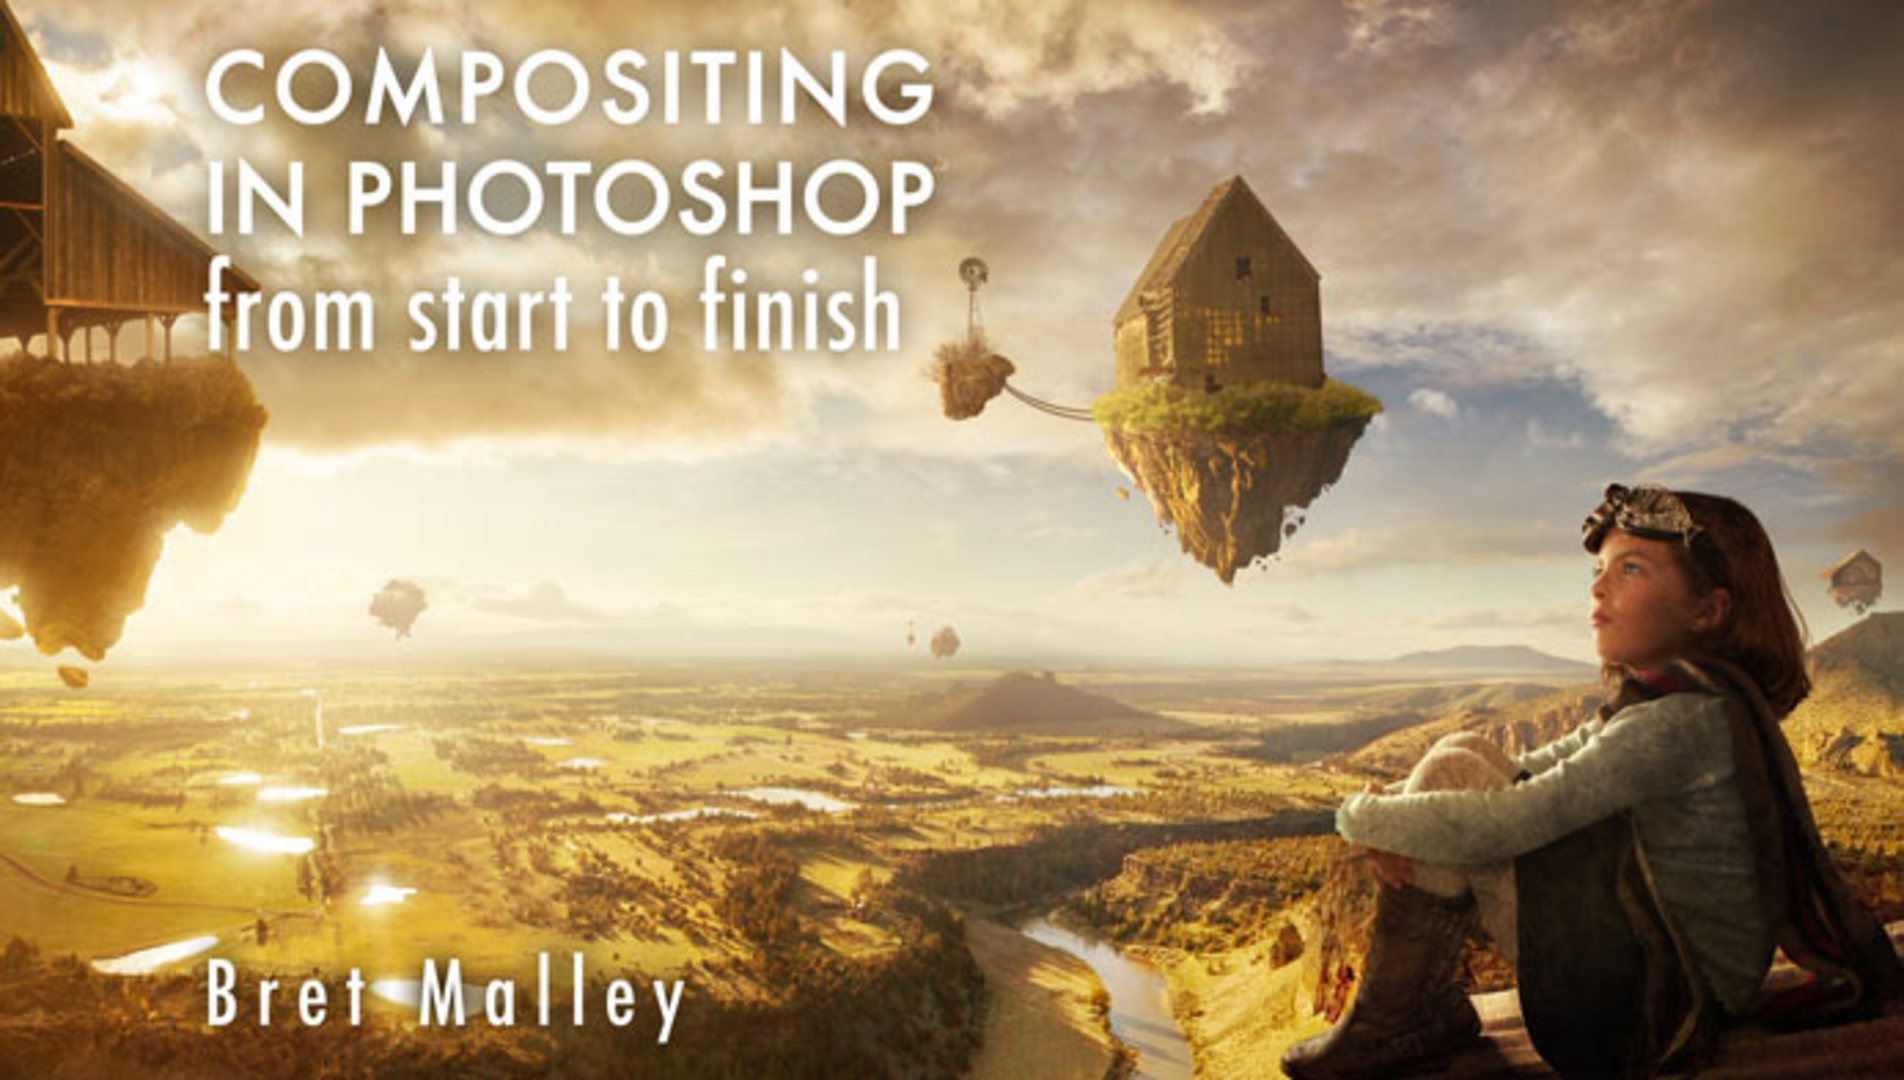 compositing in photoshop from start to finish download